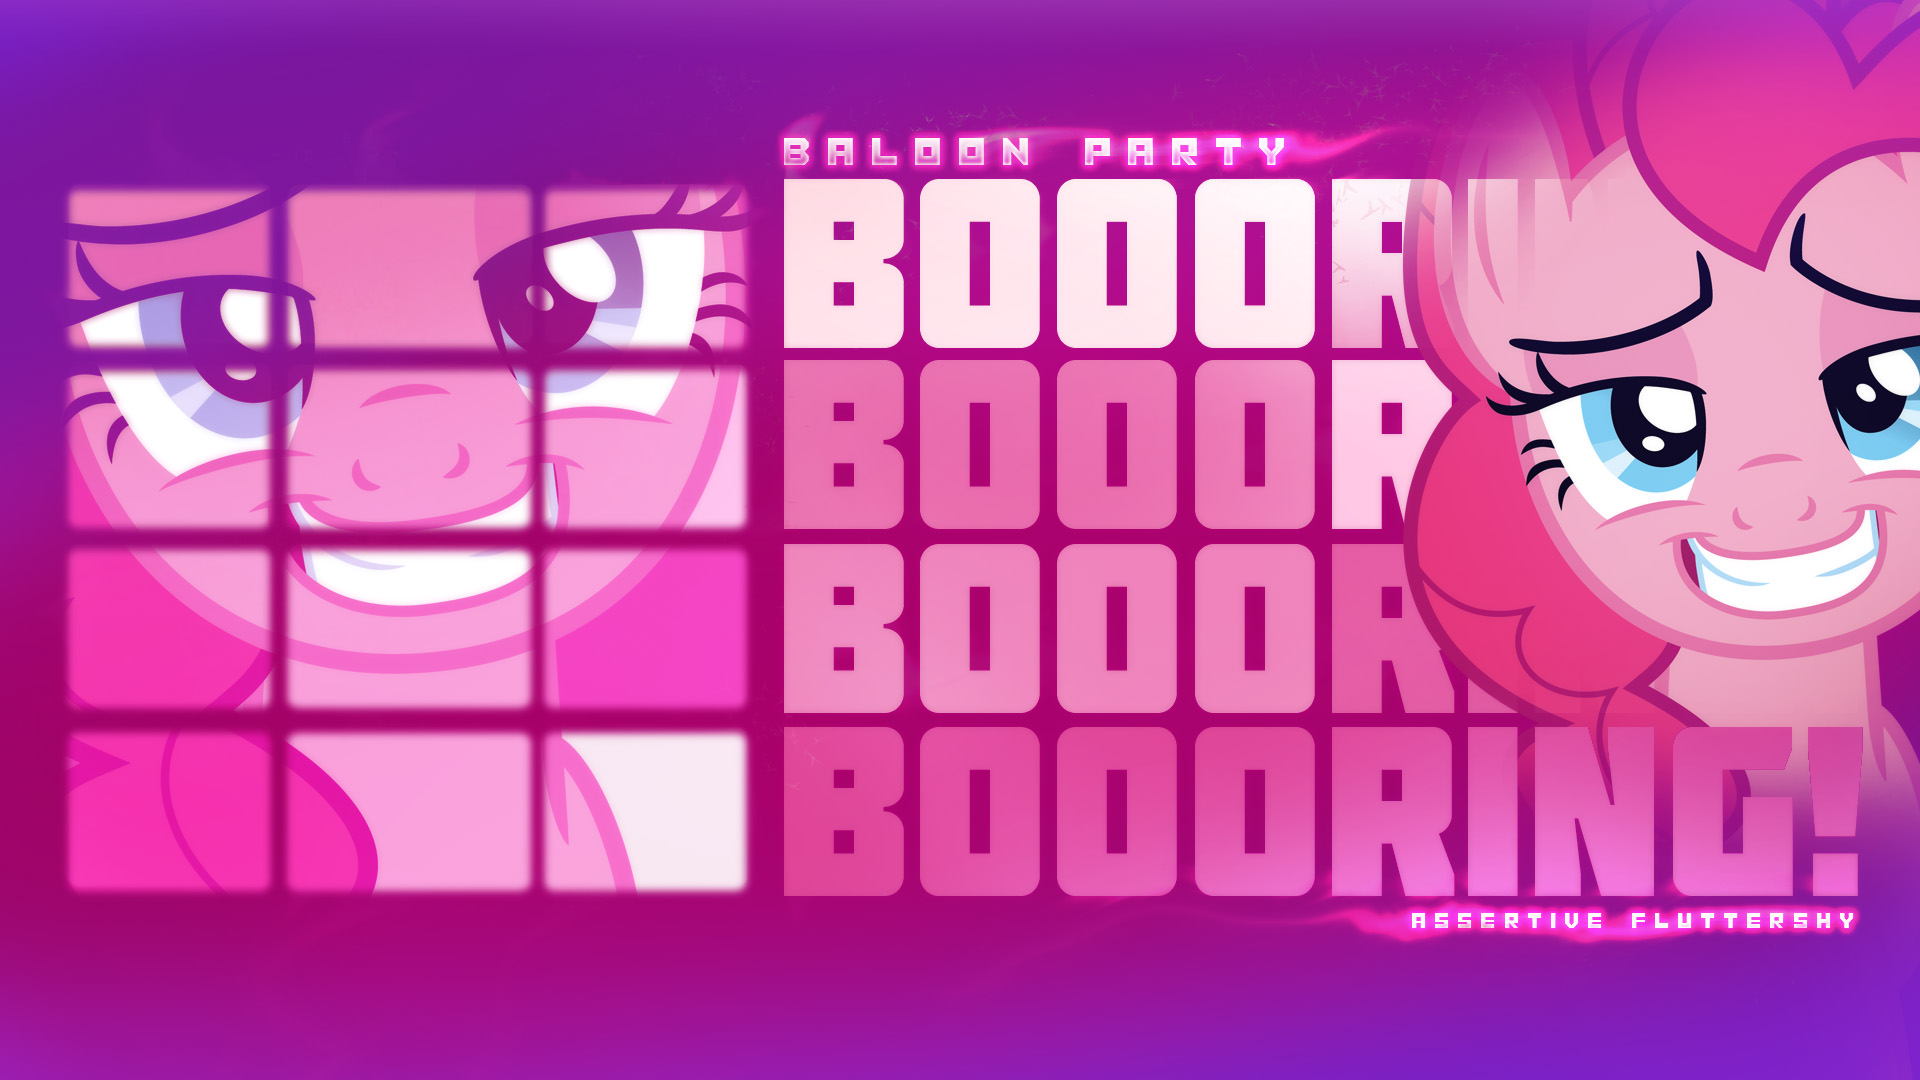 Boooring! (Tribute Wallpaper) by Geogo999 and Xtrl